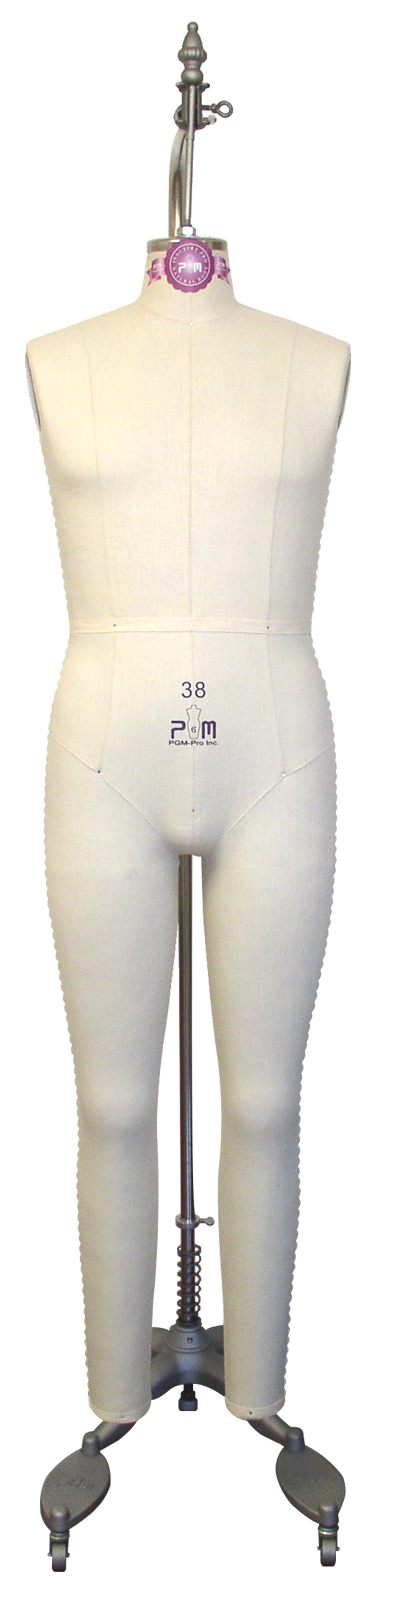 PGM Industry Grade Mature Men Full Body Dress Forms (608 - size 36 to size 38)